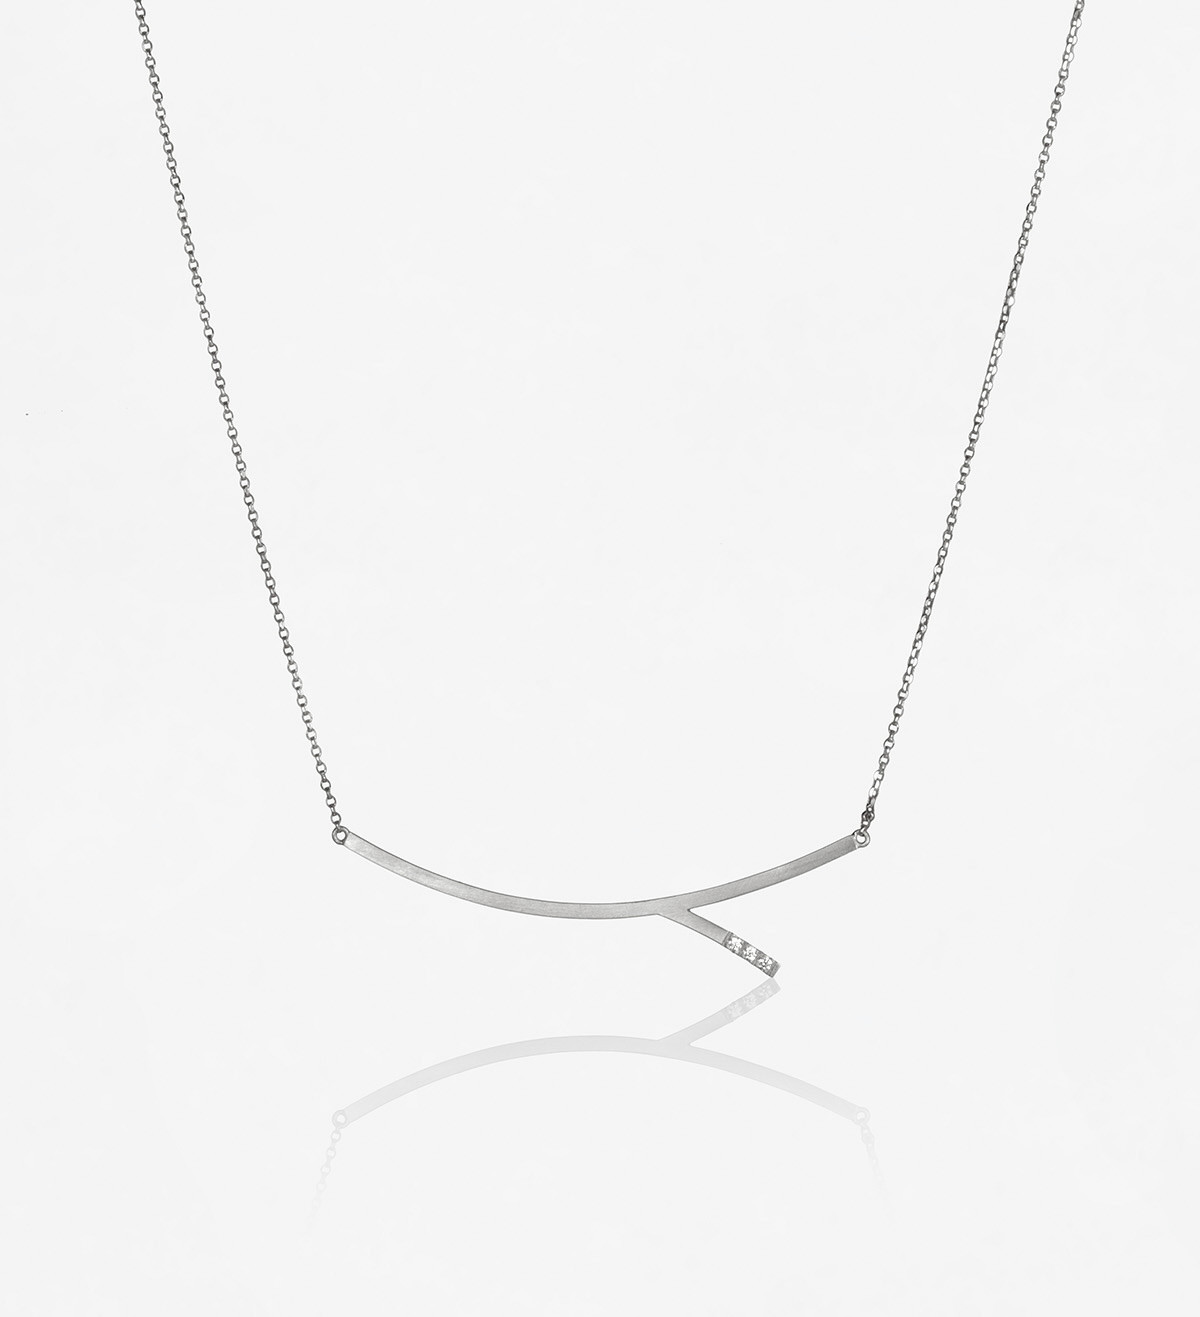 18k white gold Feel necklace with diamonds 0,021ct 45cm